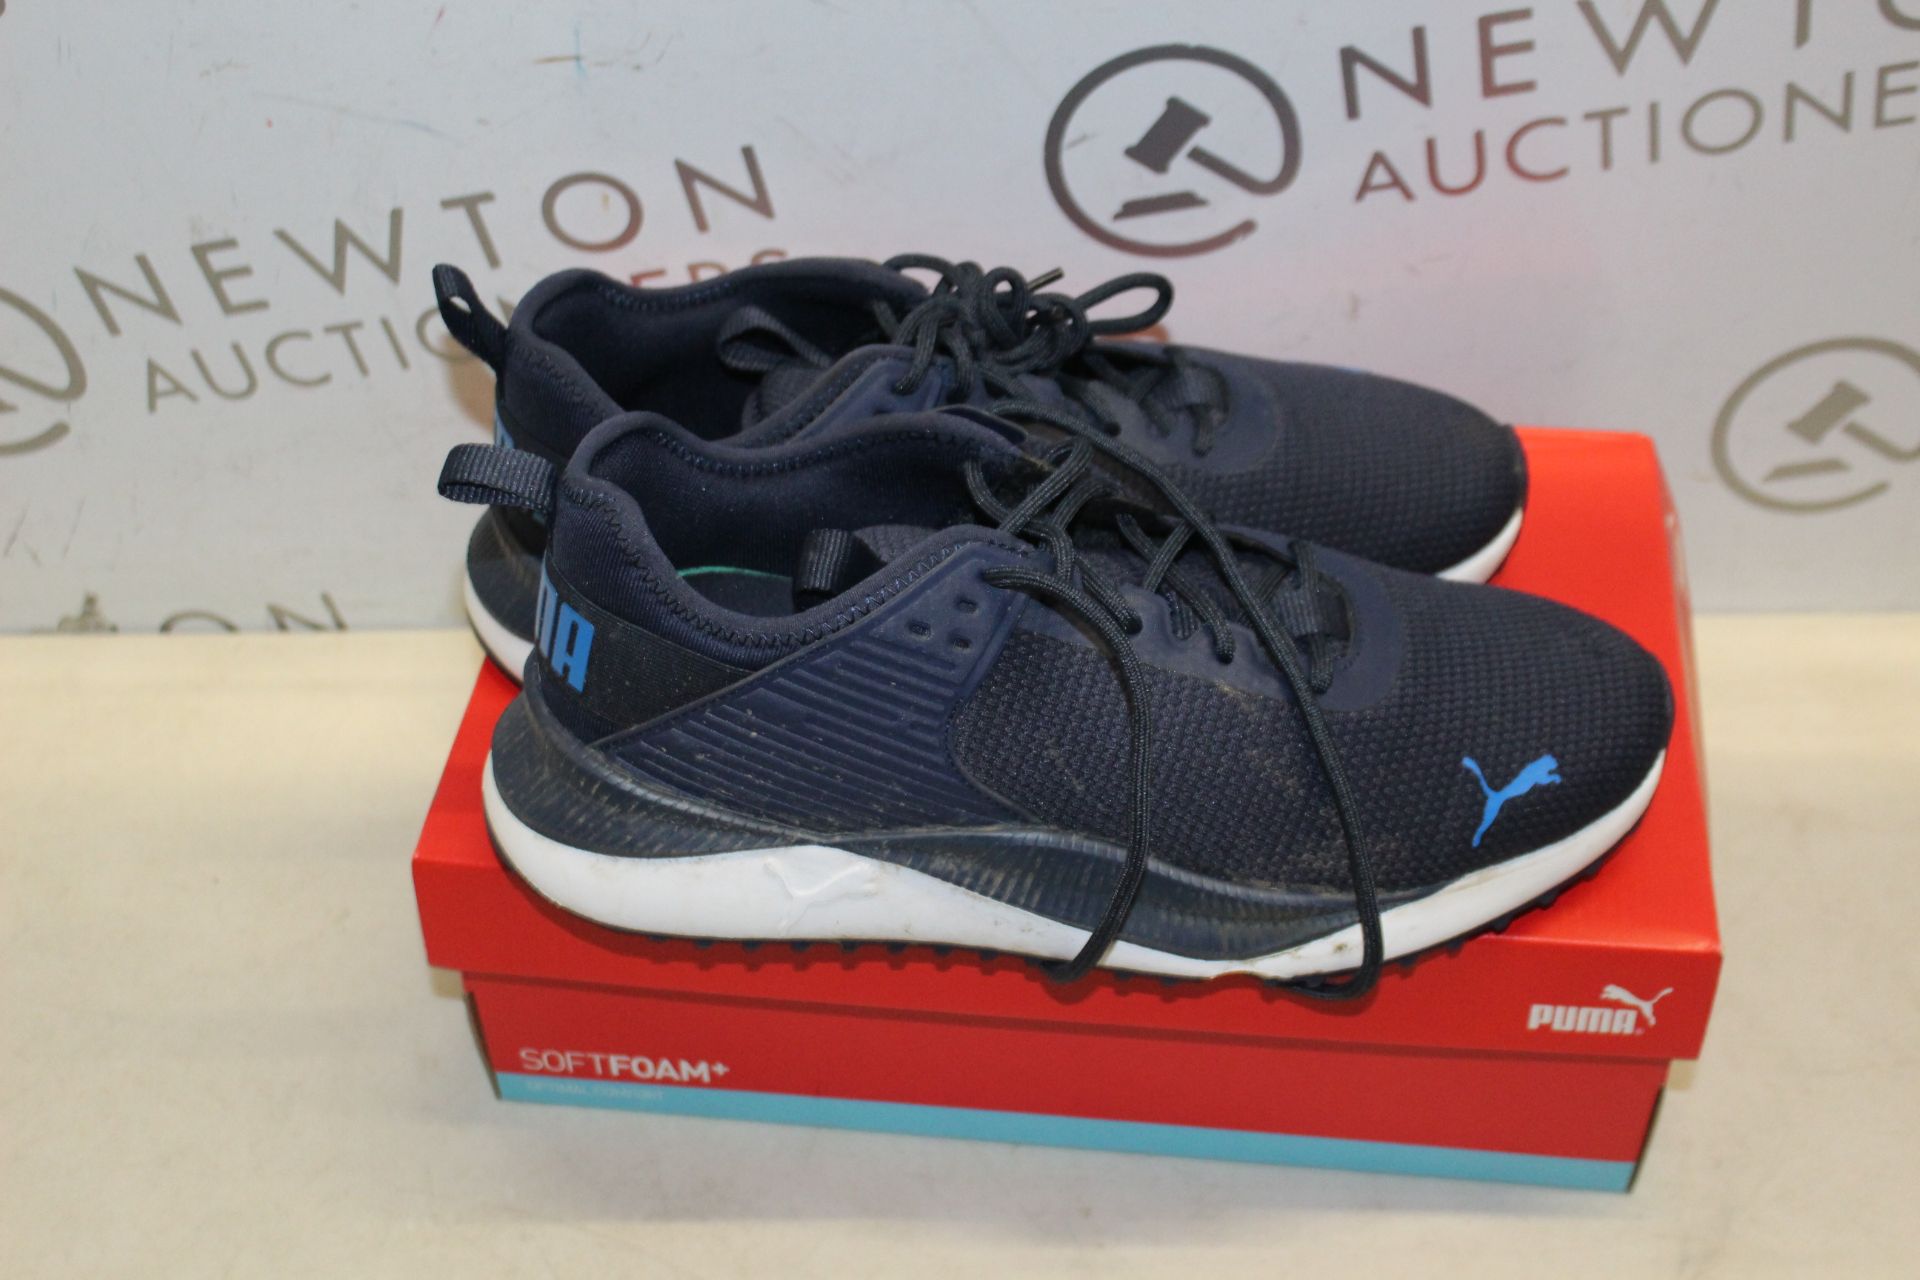 1 BOXED PUMA SOFT FORM RUNNING TRAINERS UK SIZE 9 RRP Â£39.99